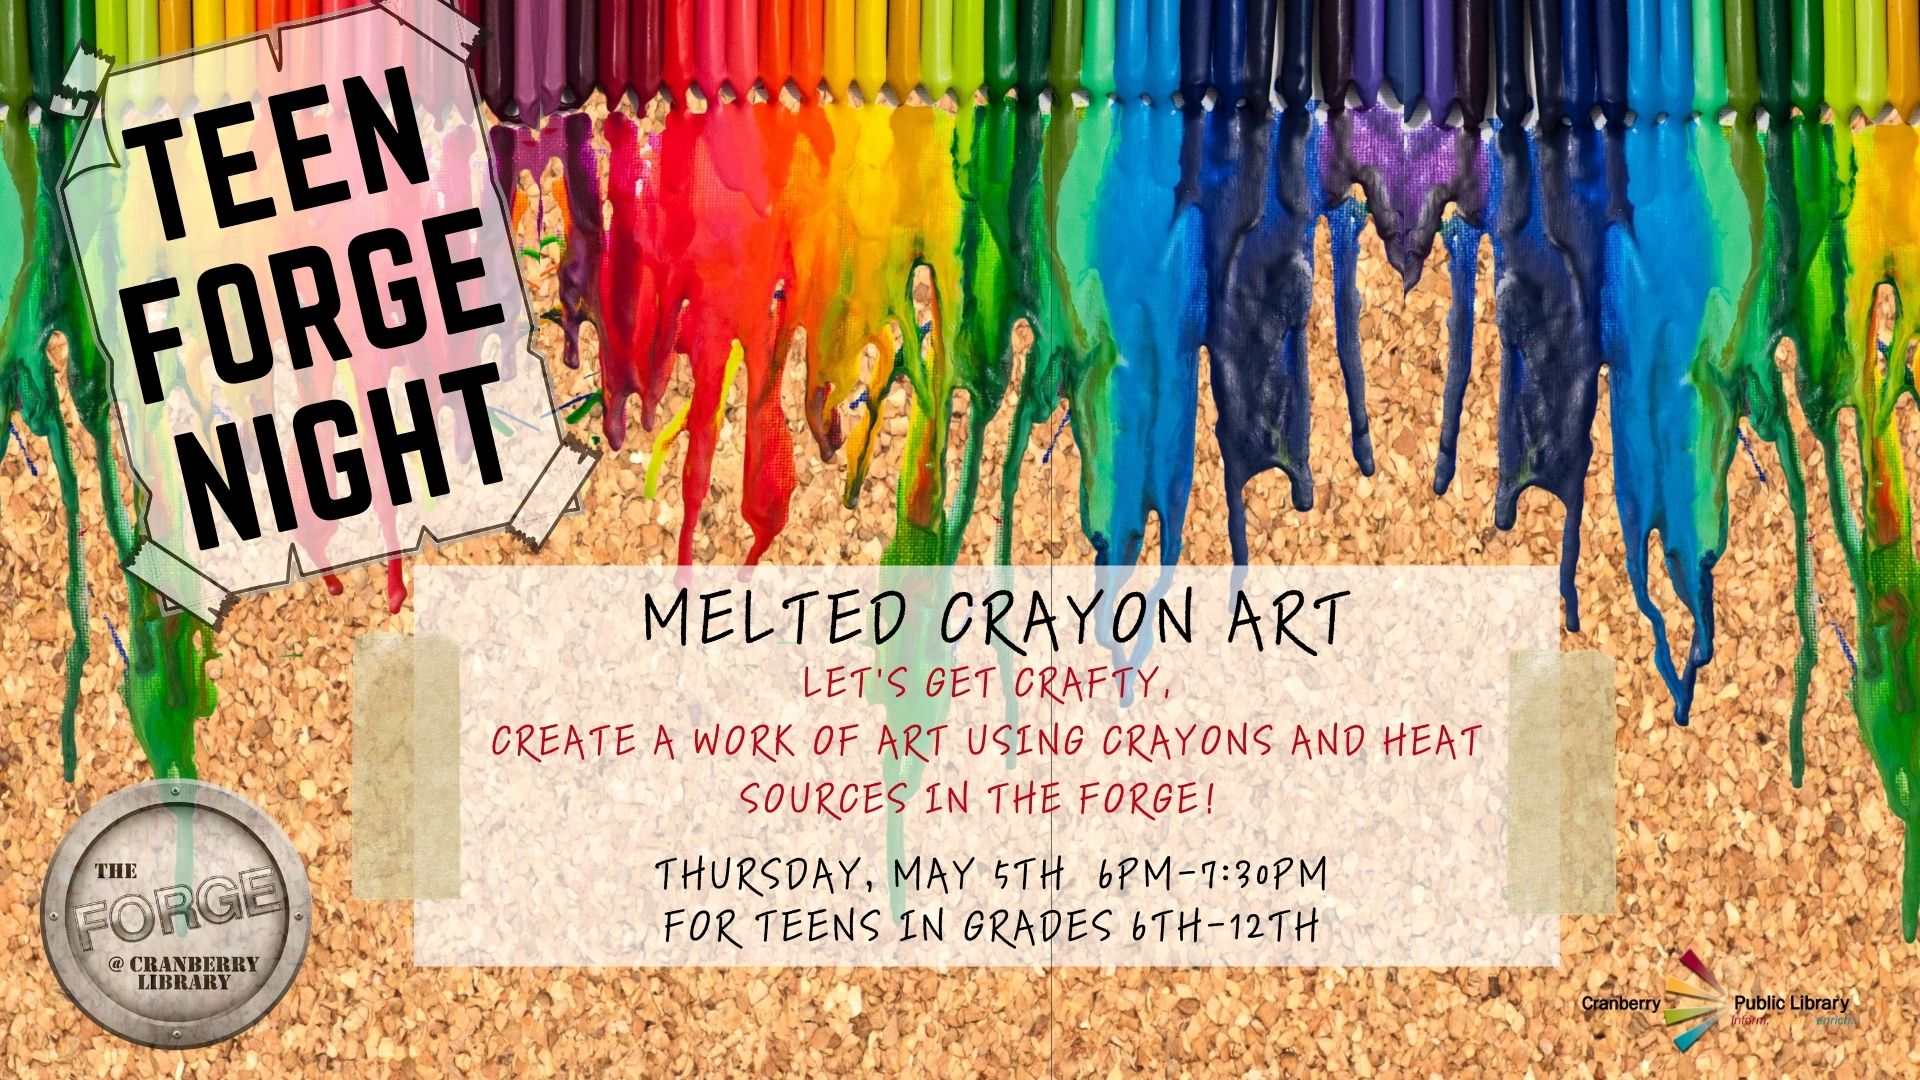 Flyer for Teen Forge Night Melted Crayon Art